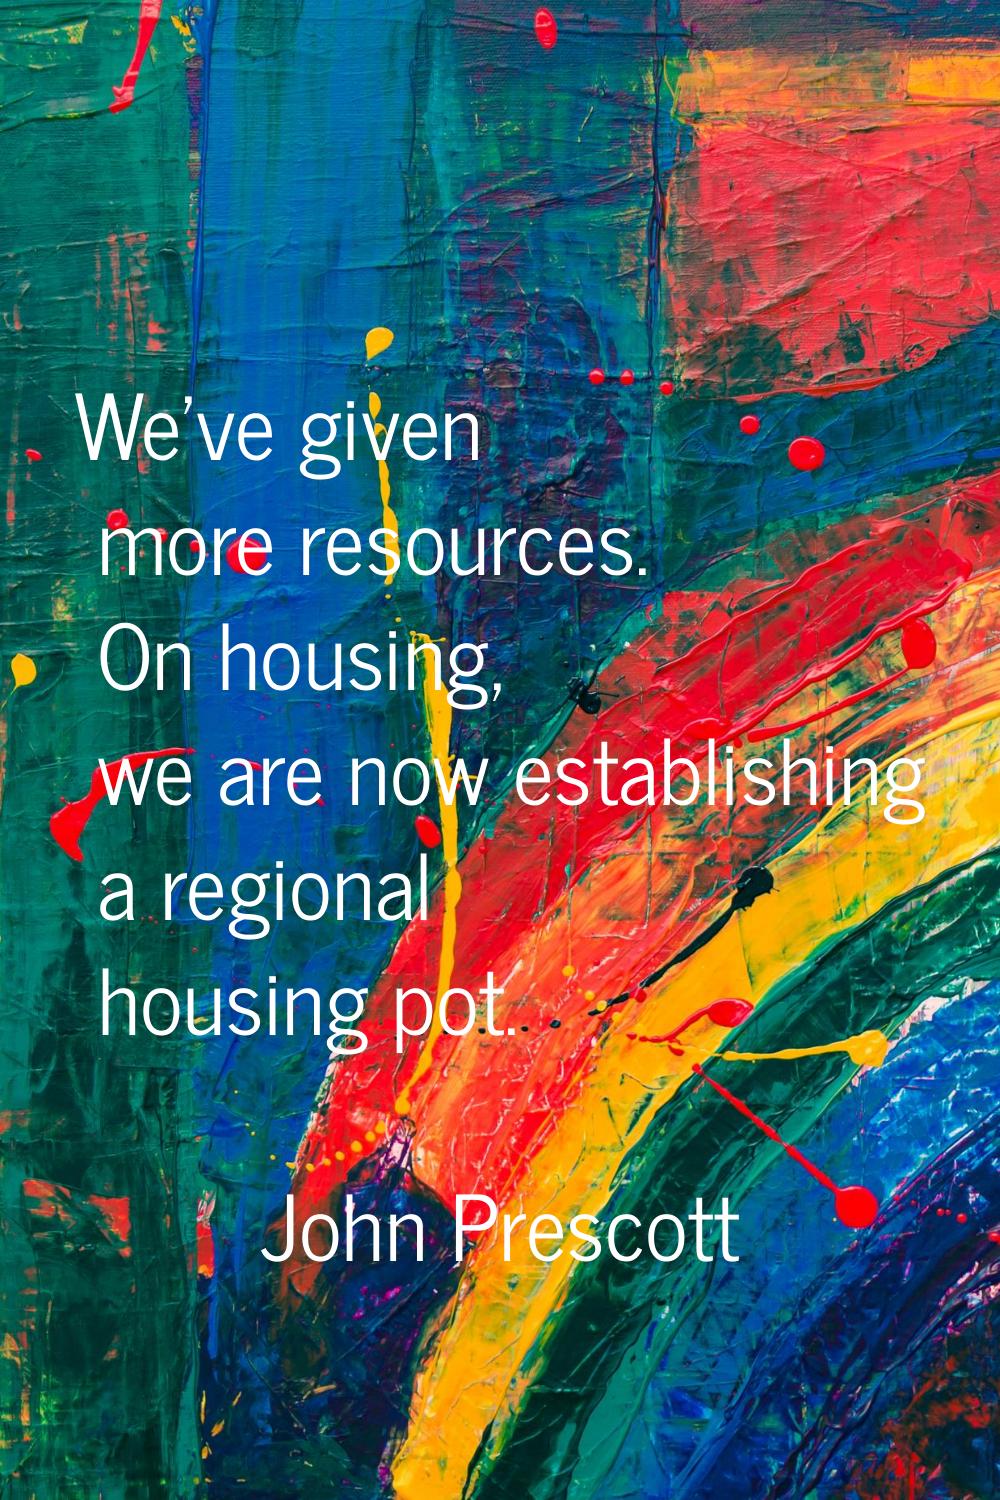 We've given more resources. On housing, we are now establishing a regional housing pot.